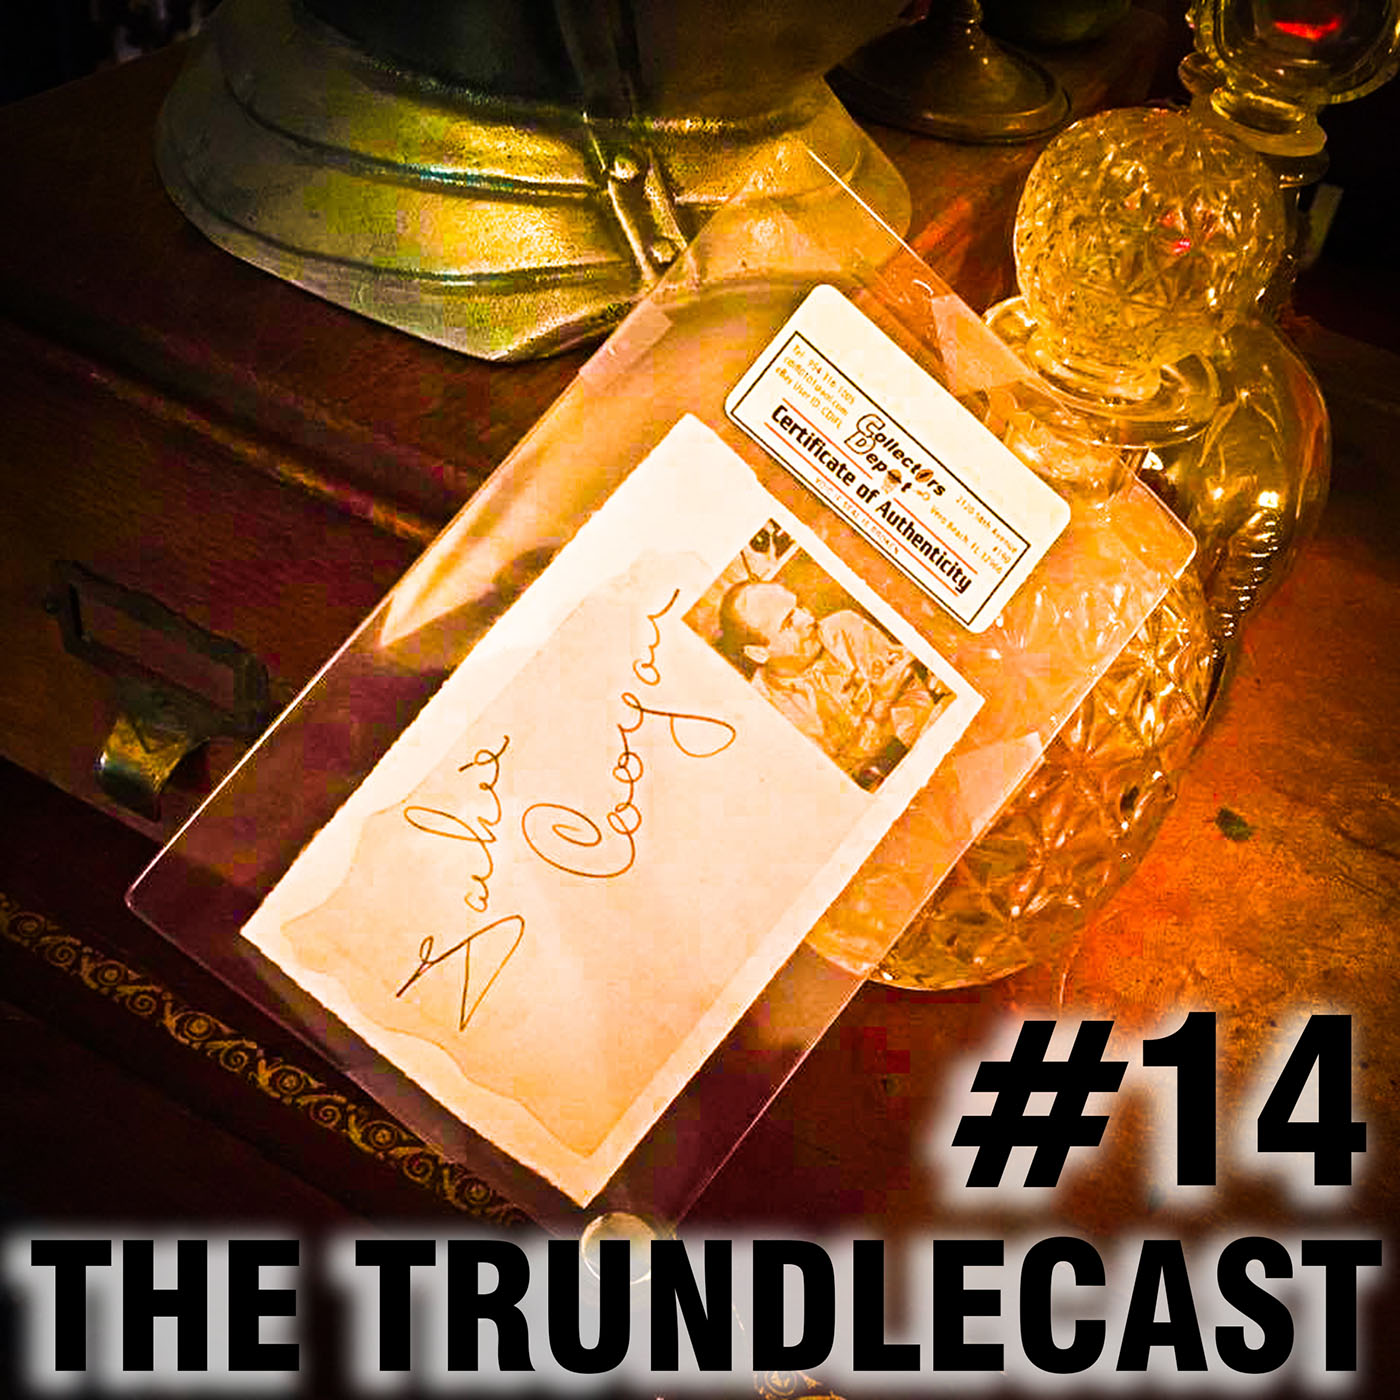 The 14th Trundlecast!